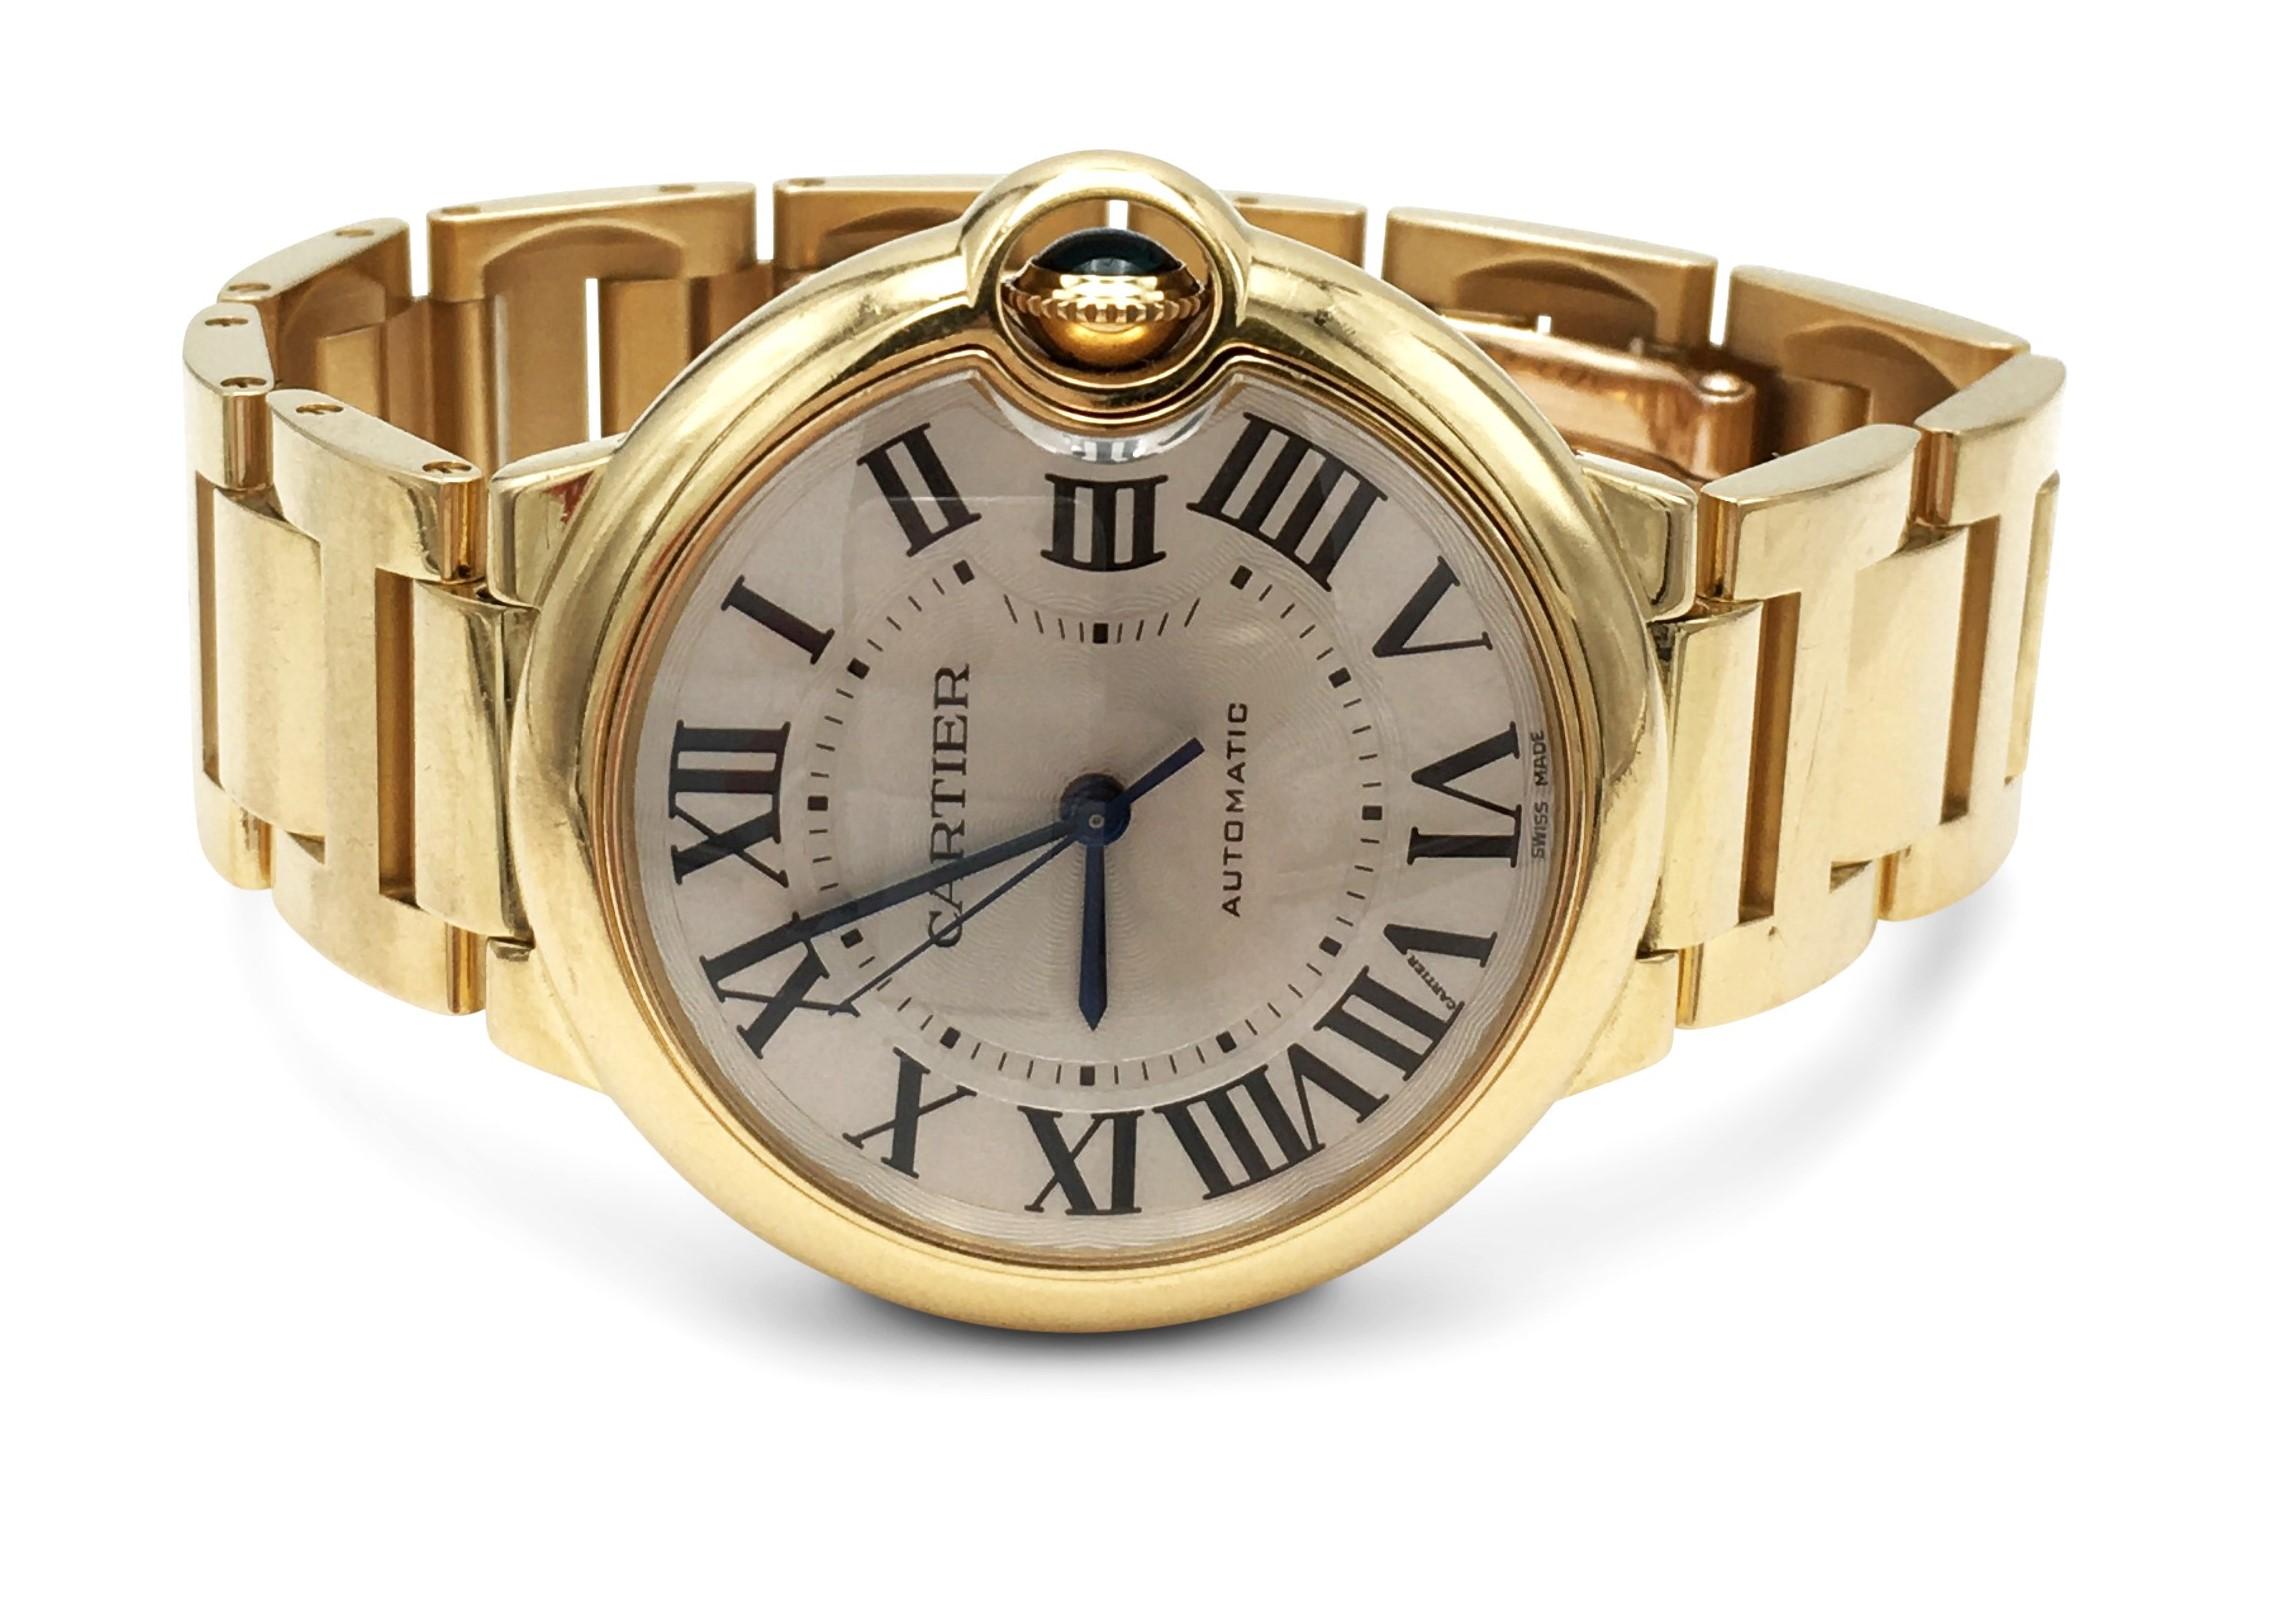 Authentic Cartier Ballon Bleu crafted in high polish 18 karat yellow gold. The round 36 mm case is finished with a domed crystal and a slightly domed gold case back. Silver sunray dial with painted black Roman numeral markers.  Hidden folding clasp.